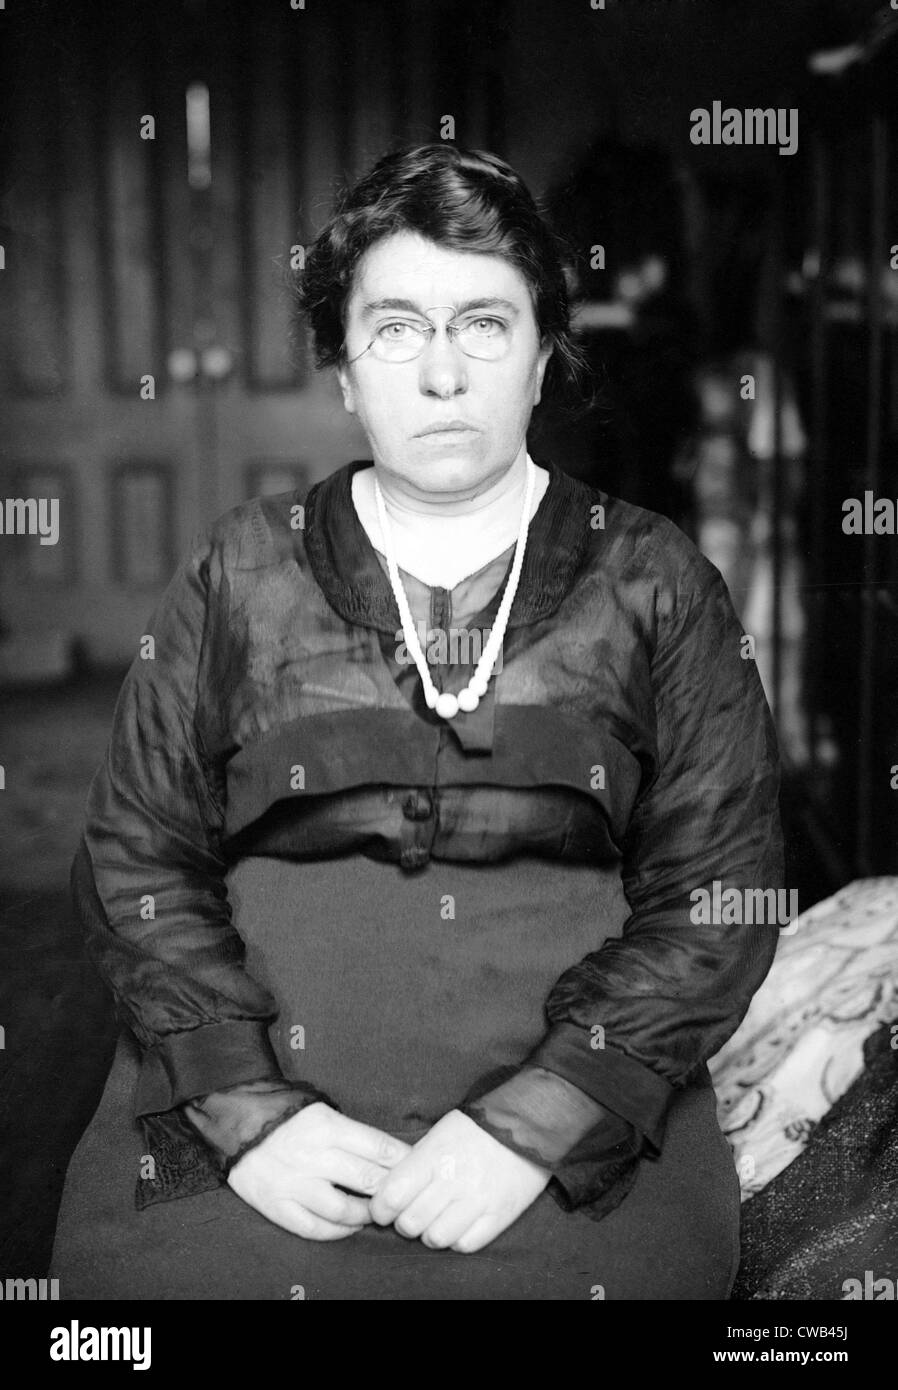 Emma Goldman. Anarchist and radical revolutionary, she was deported in 1919. photo 1916. Stock Photo